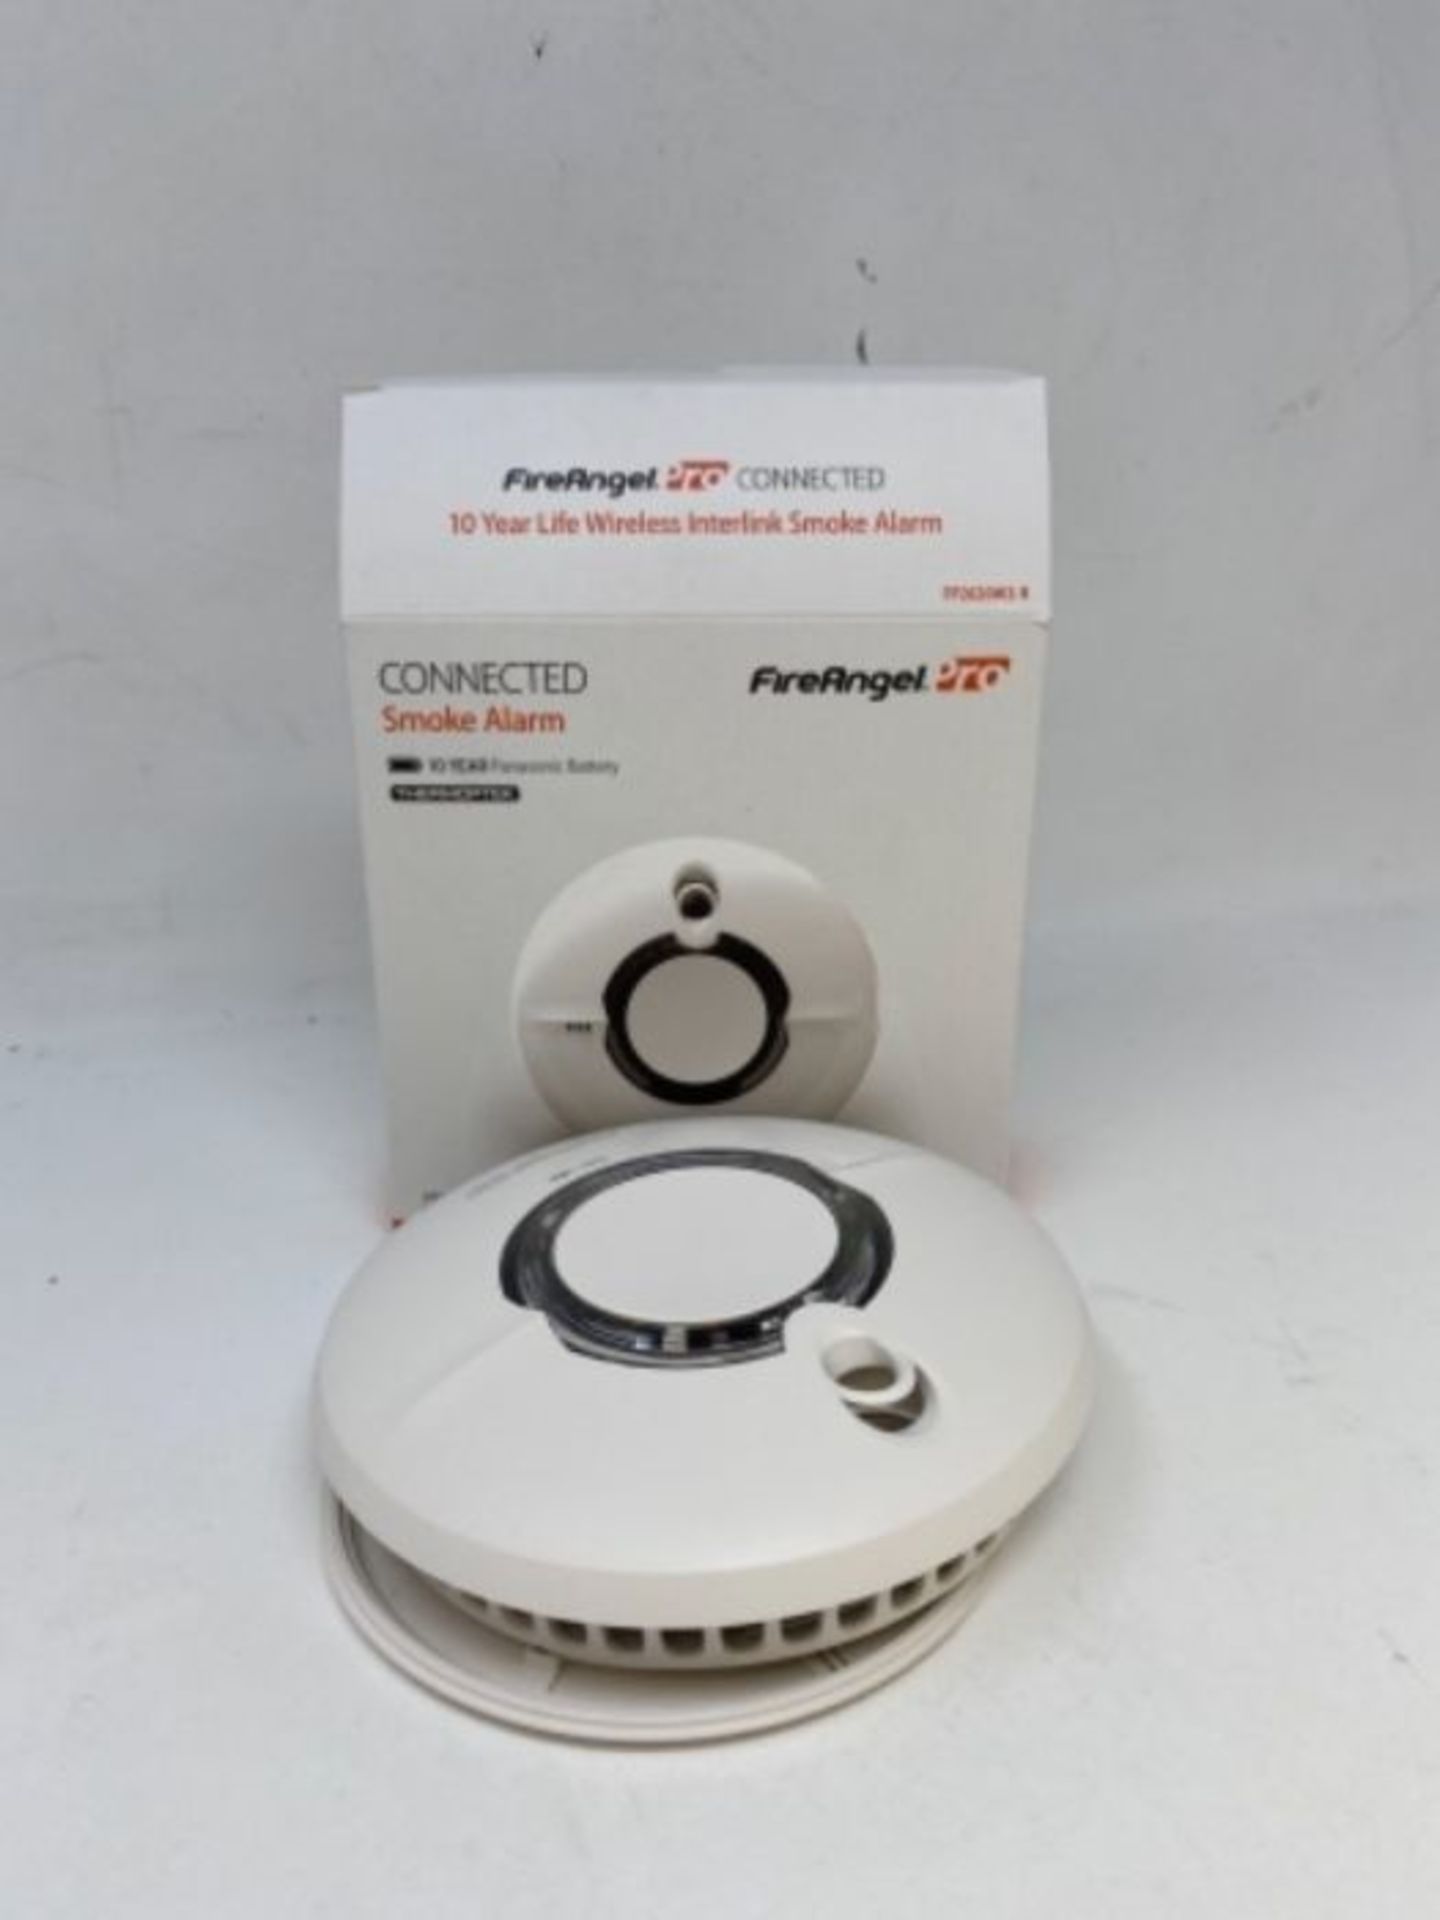 FireAngel Pro Connected Smart Smoke Alarm, Battery Powered with Wireless Interlink - Image 2 of 2